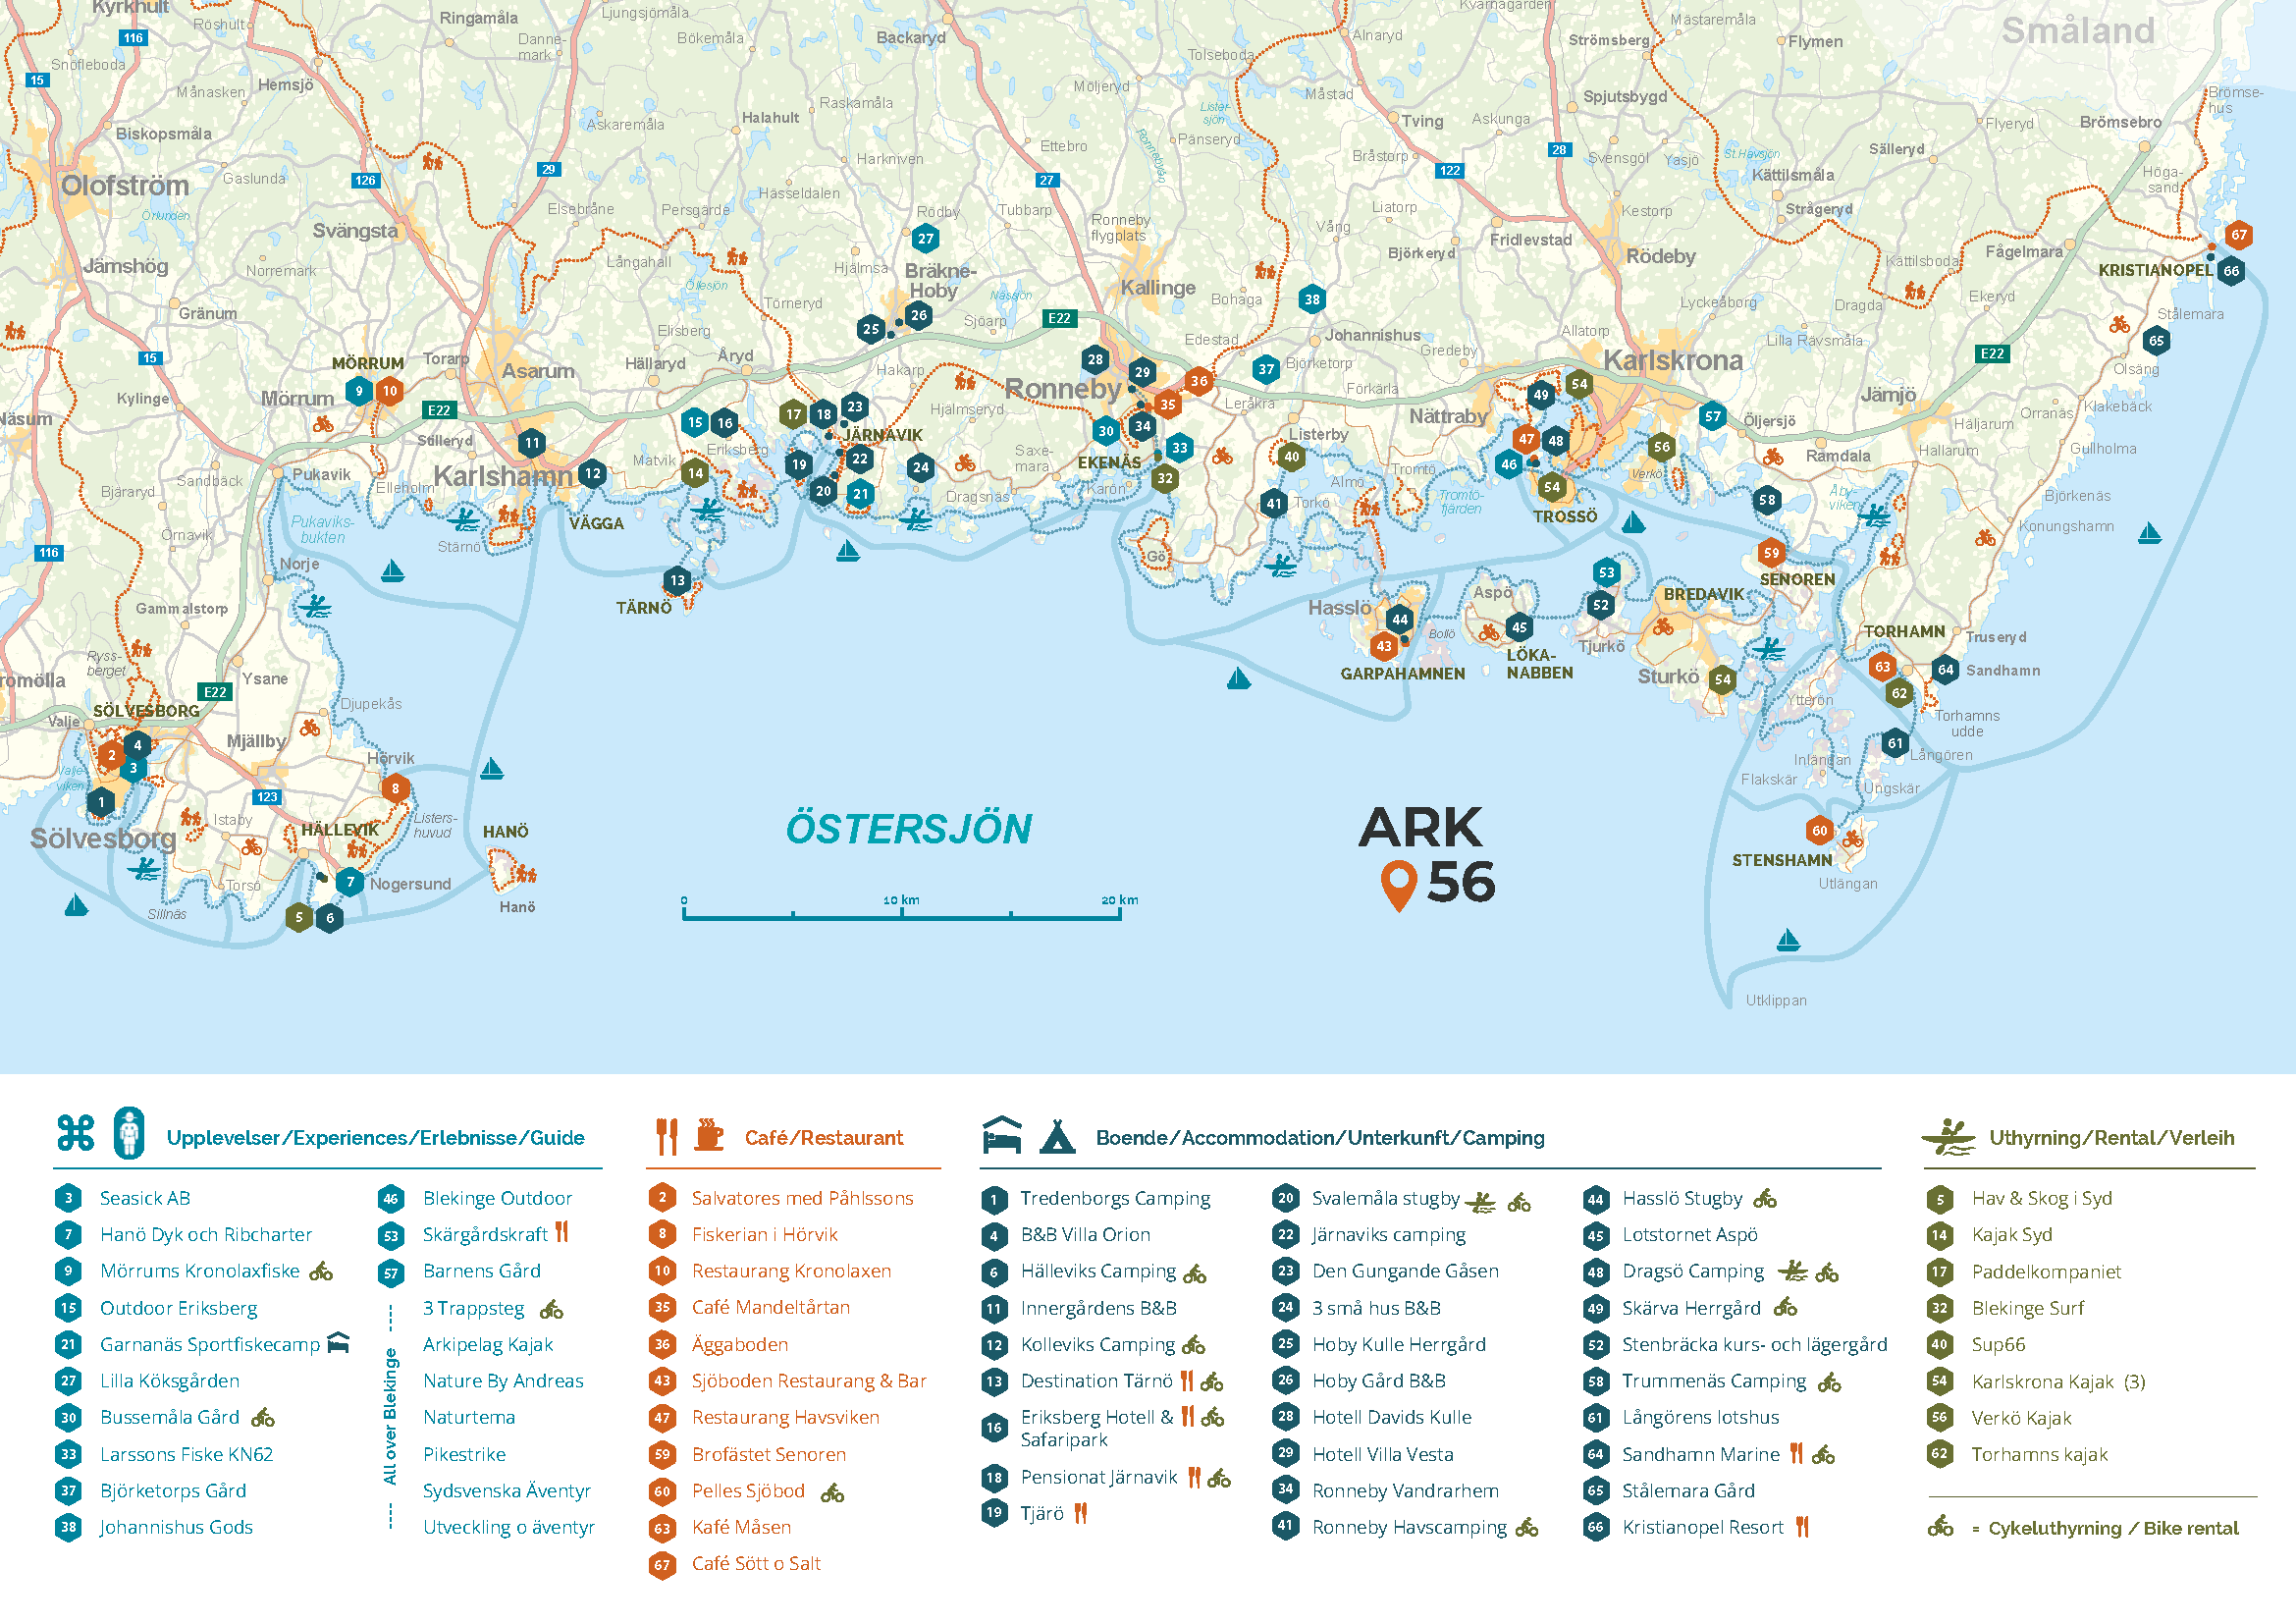 New map of all companies in the ARK56 network